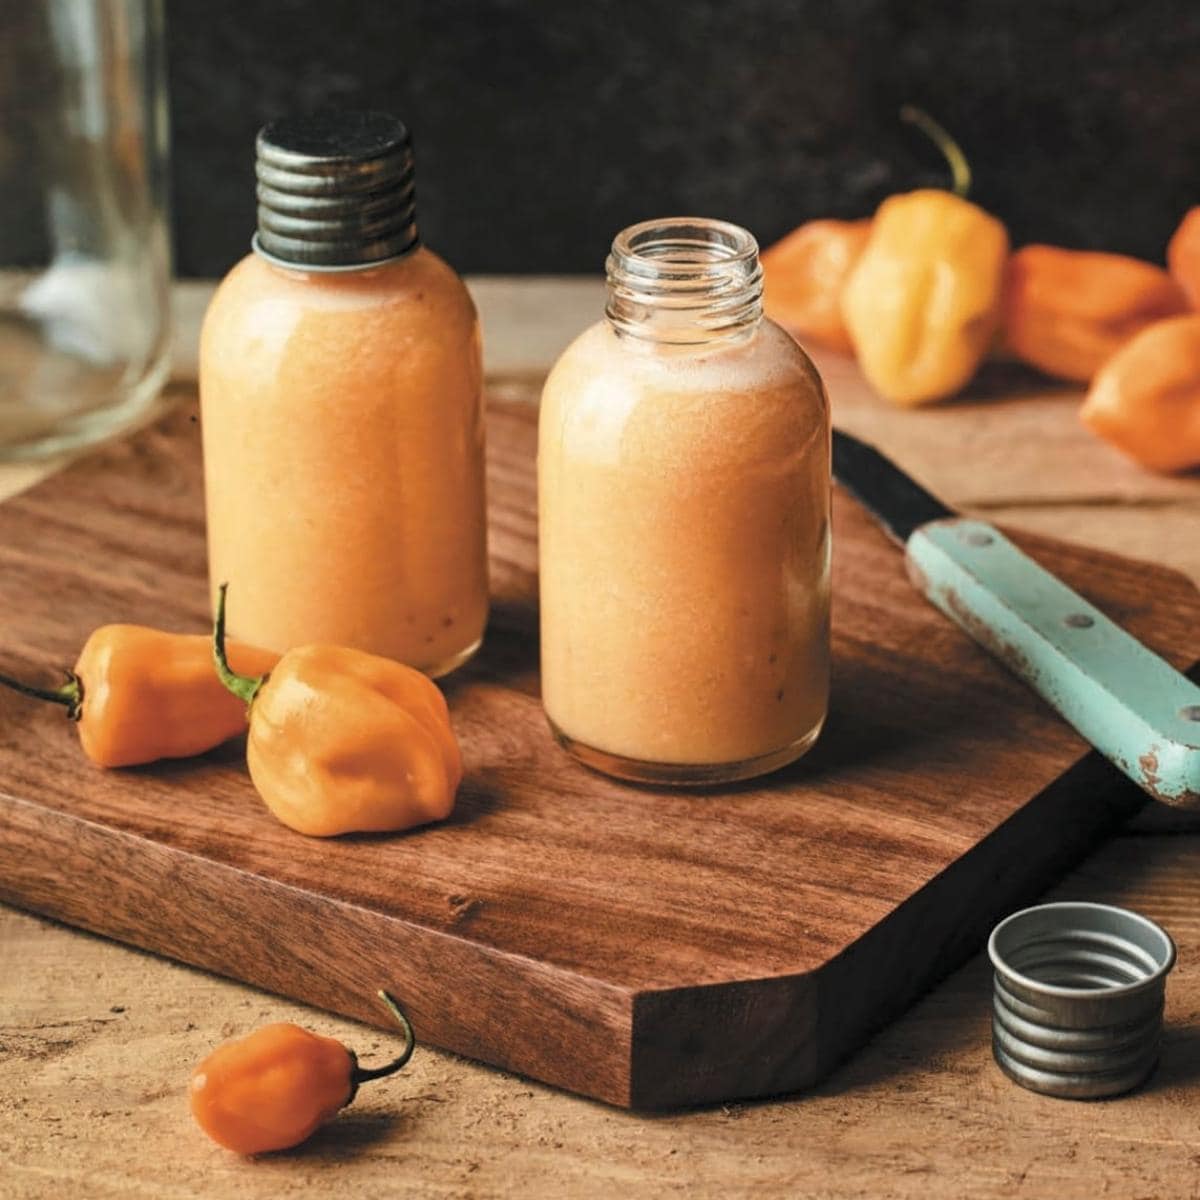 Clear glass bottles filled with orange red hot sauce resting on a wooden cutting board.